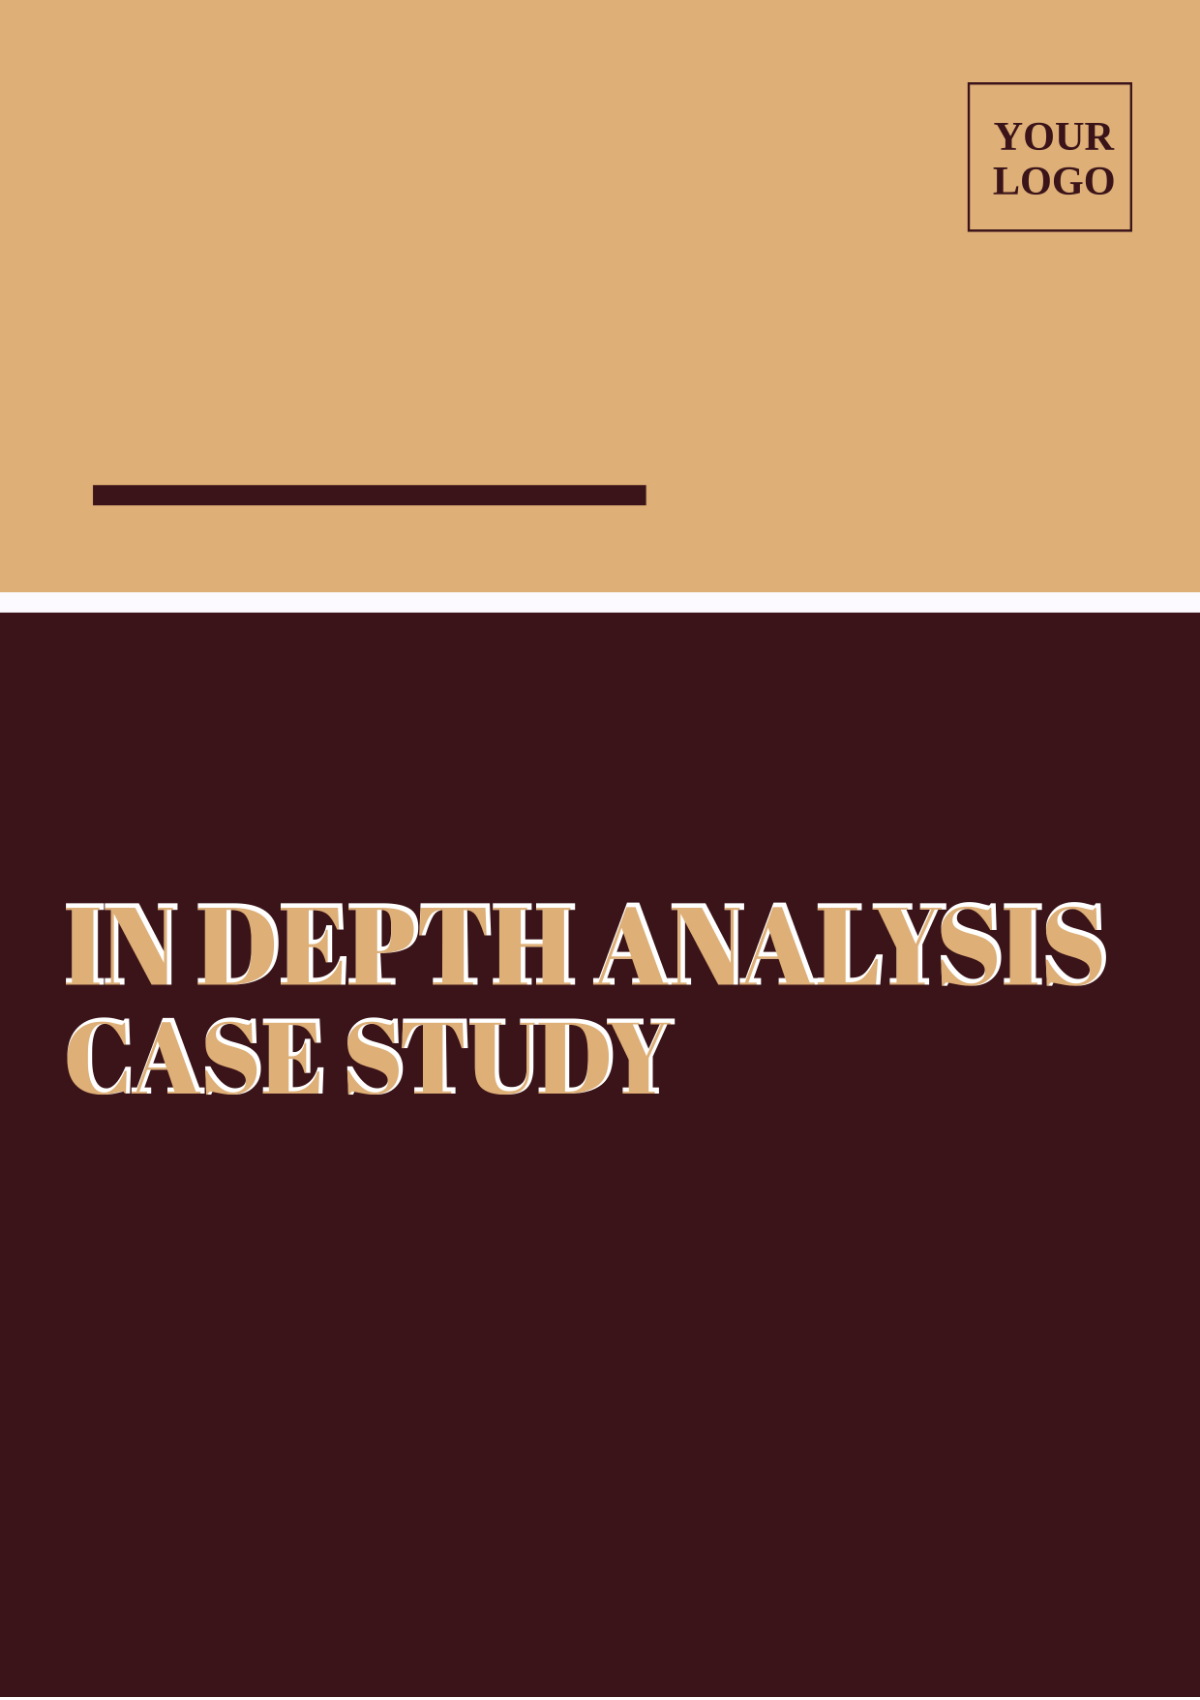 In Depth Analysis Case Study Template